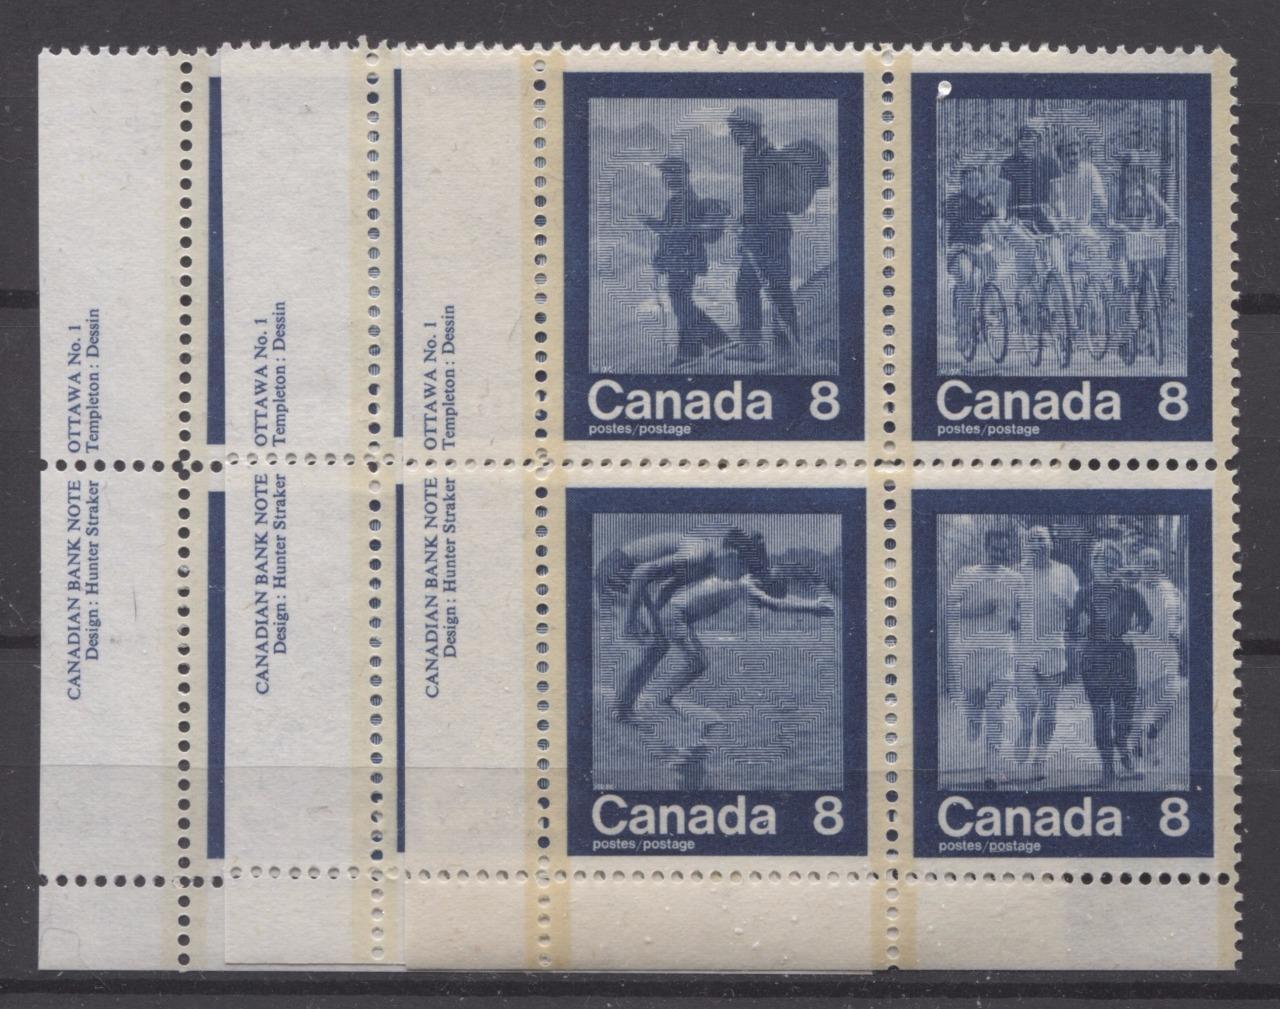 Canada #632a (SG#768a) 1974 Summer Sports Issue Block of 4 Paper/Tag Type 1 Plate 1 LL VF-75 NH Brixton Chrome 